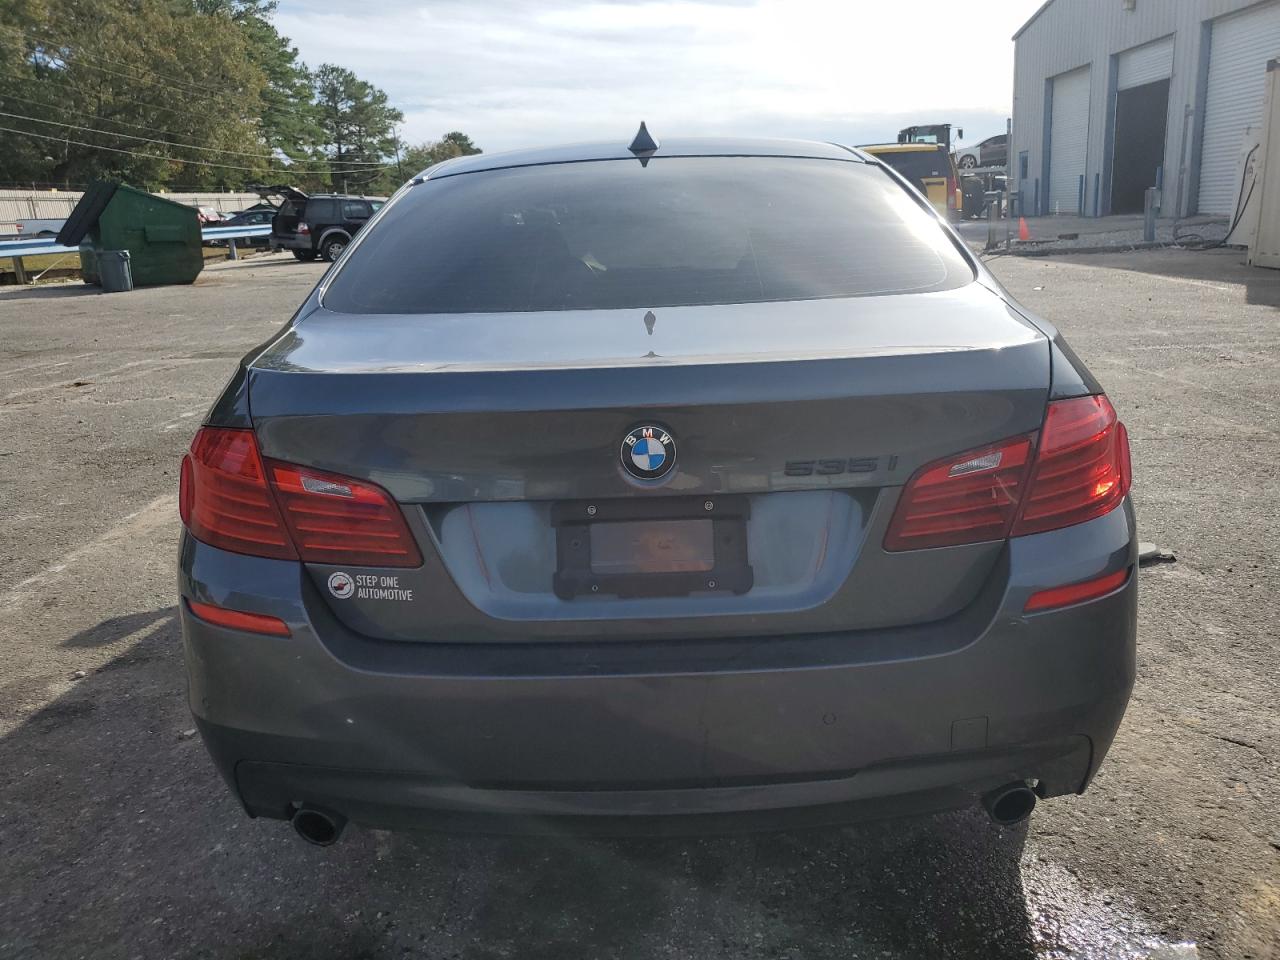 WBA5B1C53FG****** Salvage and Repairable 2015 BMW 5 Series in Alabama State